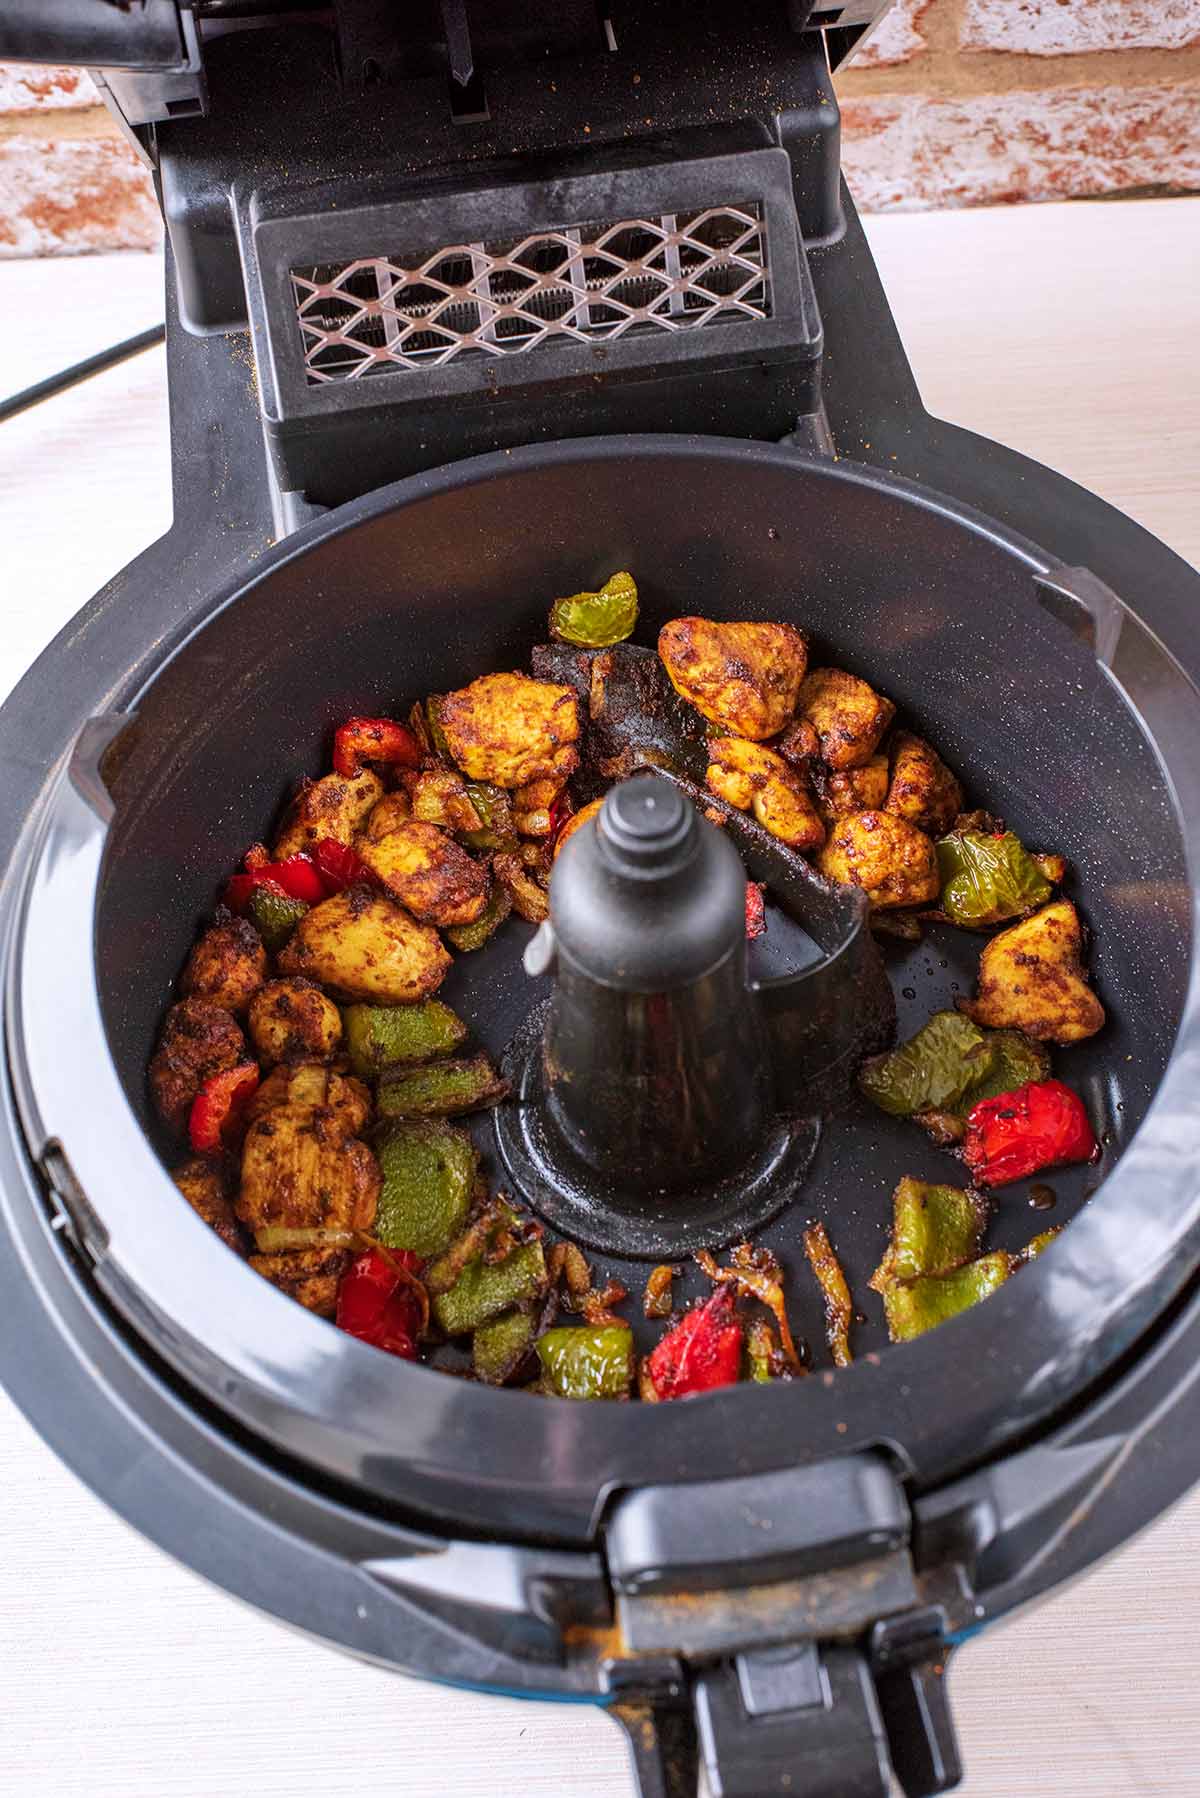 An air fryer with the lid open containing cooked chicken, vegetables and spices.